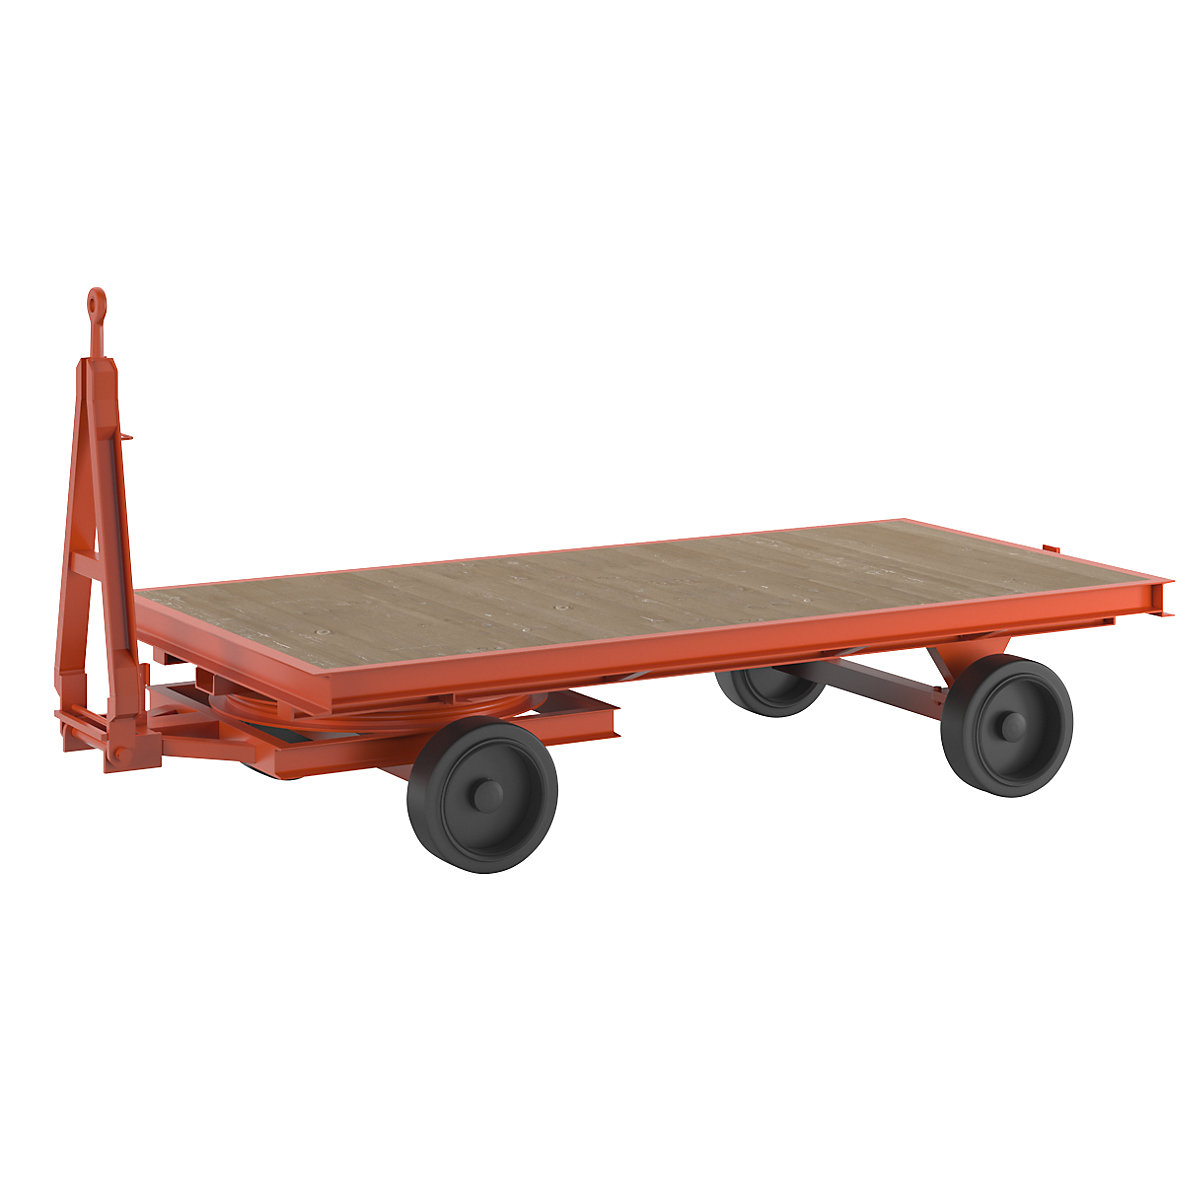 Trailer, 4-wheel double turntable steering, max. load 8 t, platform 3.0 x 1.5 m, solid rubber tyres-12